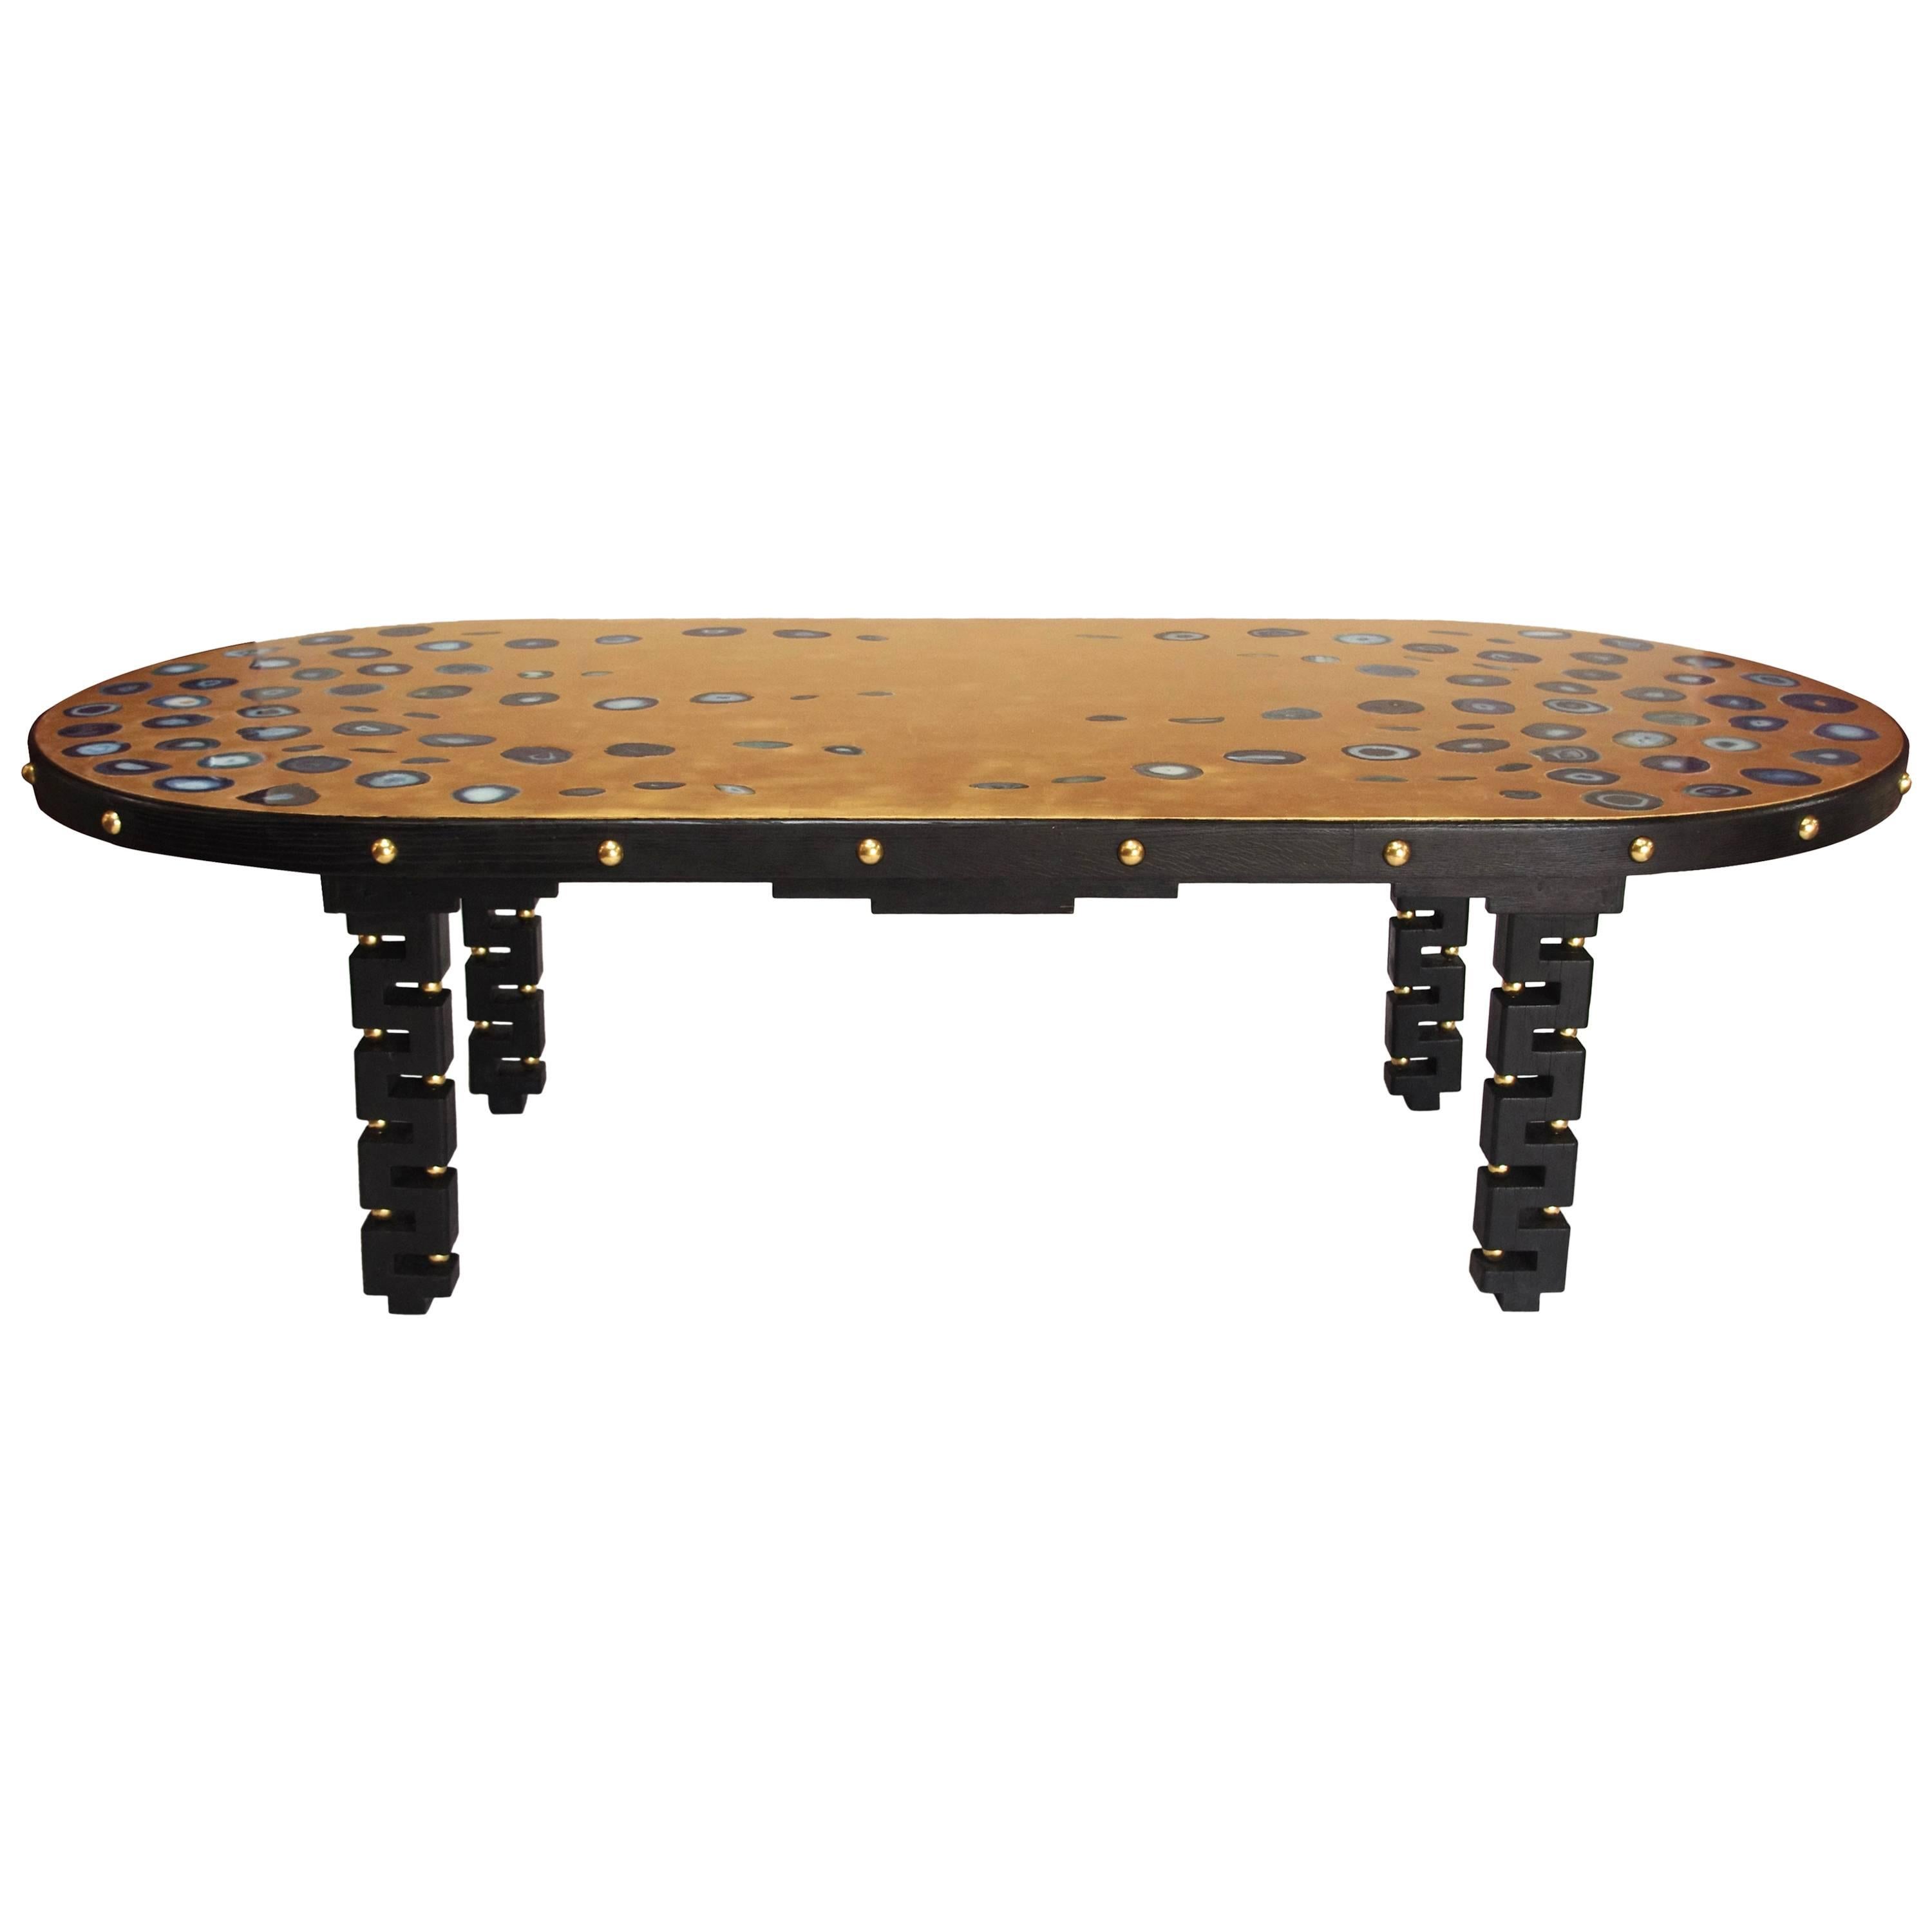 Large blackened oak table with gilt tray inlaid of agates, contemporary work